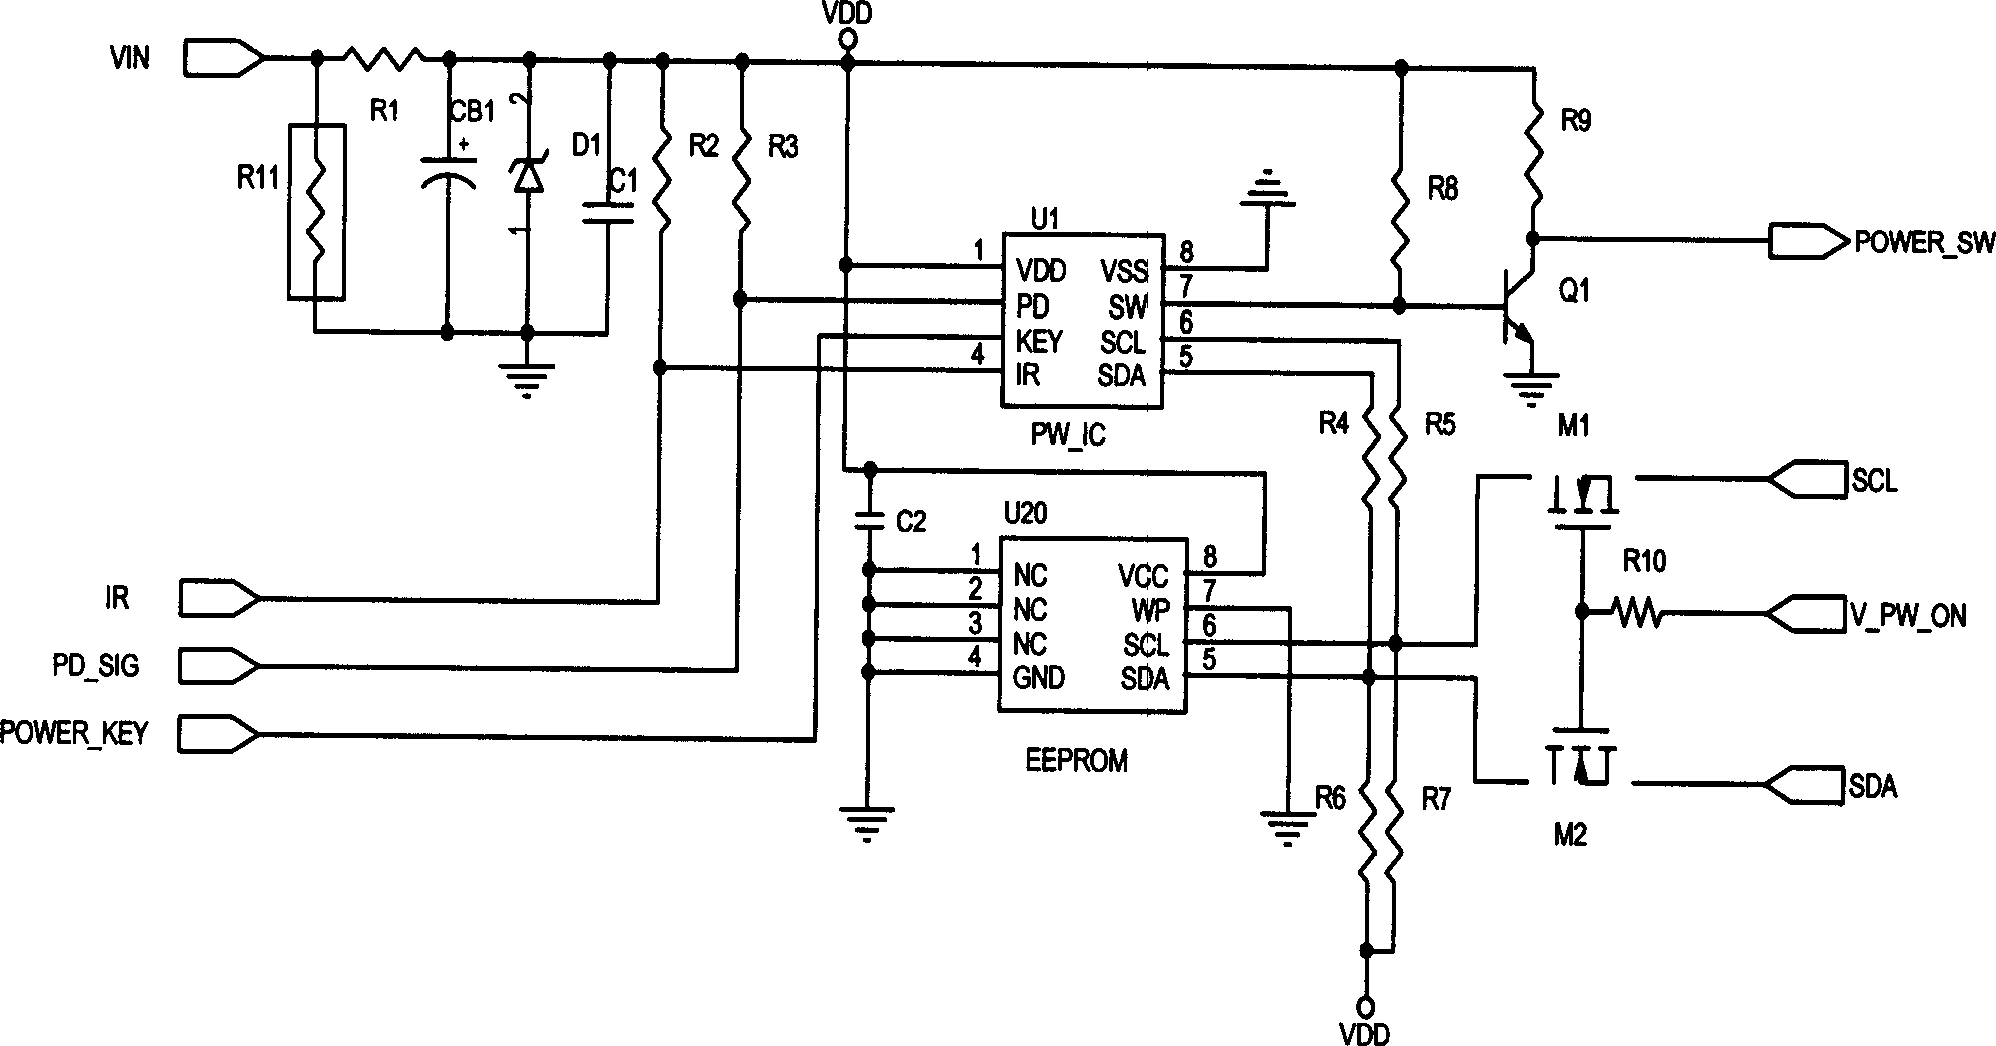 Power managing method and circuit for main system open/stand by management